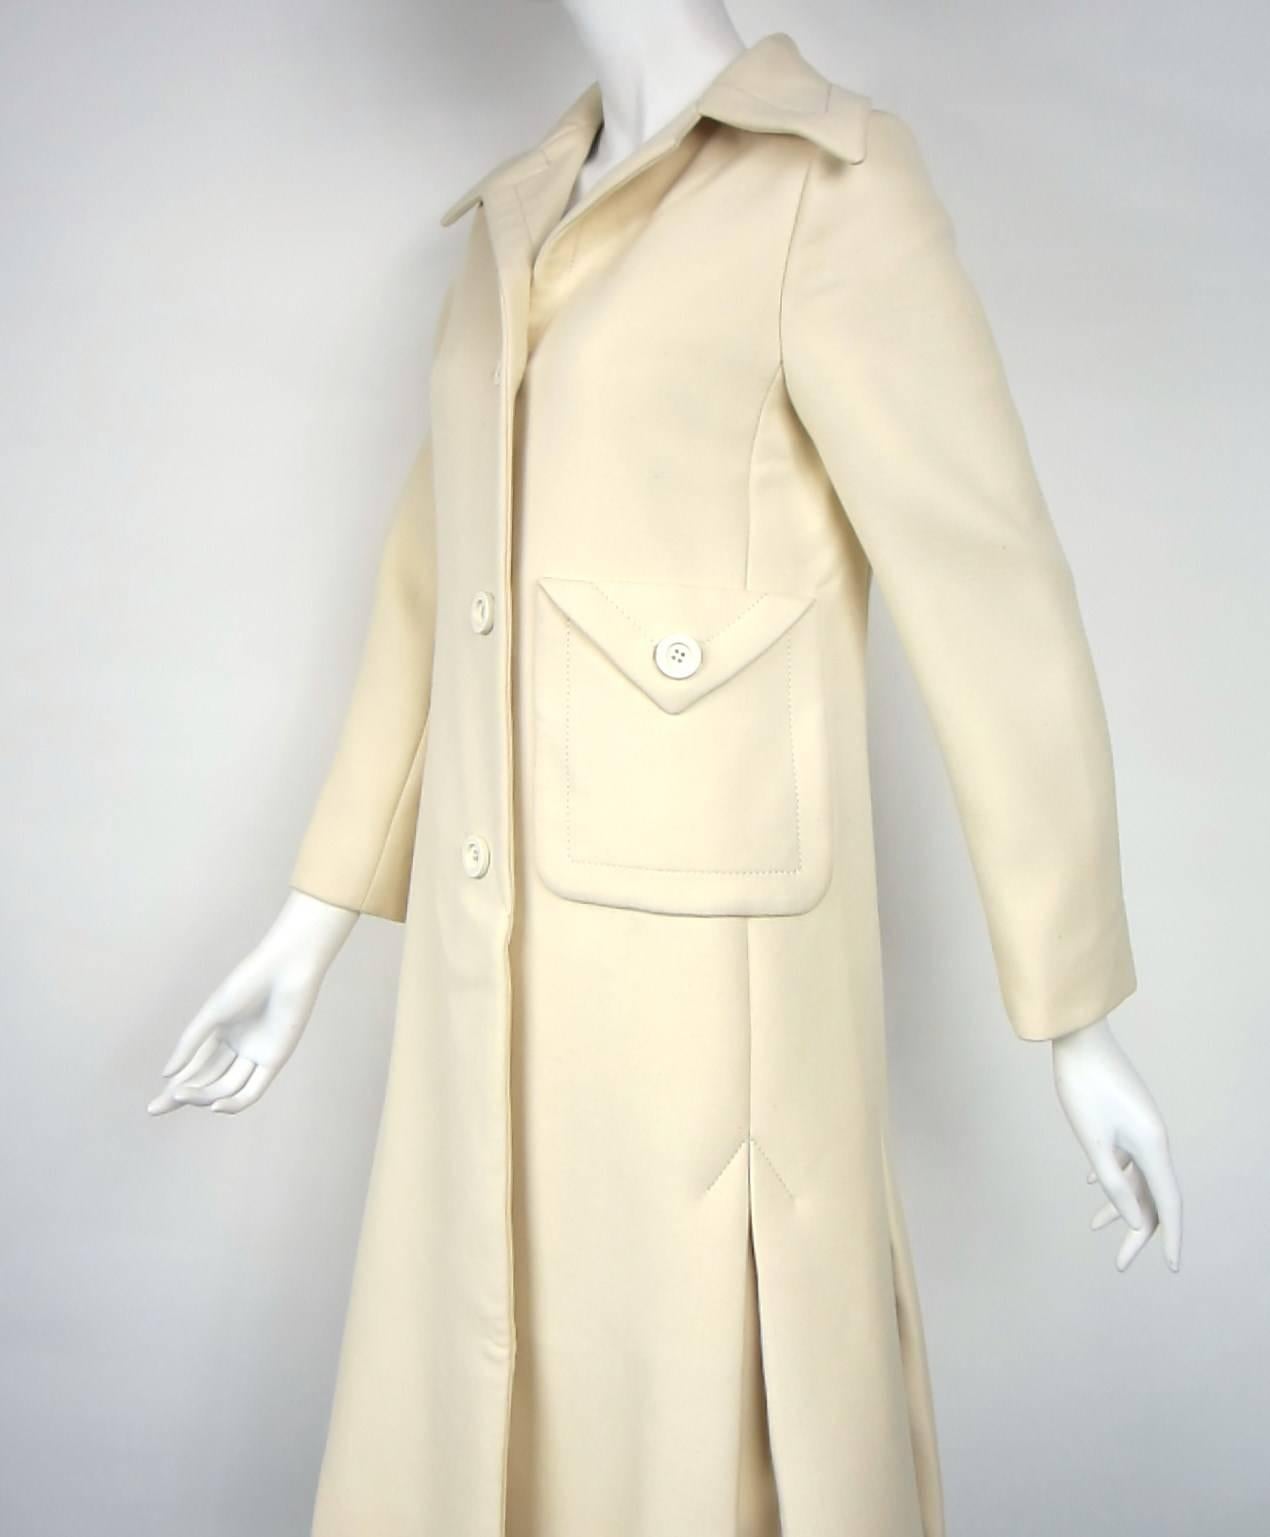 Stunning Cream James Galanos stroller coat
Invented pleated around entire coat 
One pocket
Button down front 
Measures 
32 Inch bust
34 inch waist 
38 inch hips 
23 inch sleeve
42.5 inches in  length

Any questions please call, email or hit request